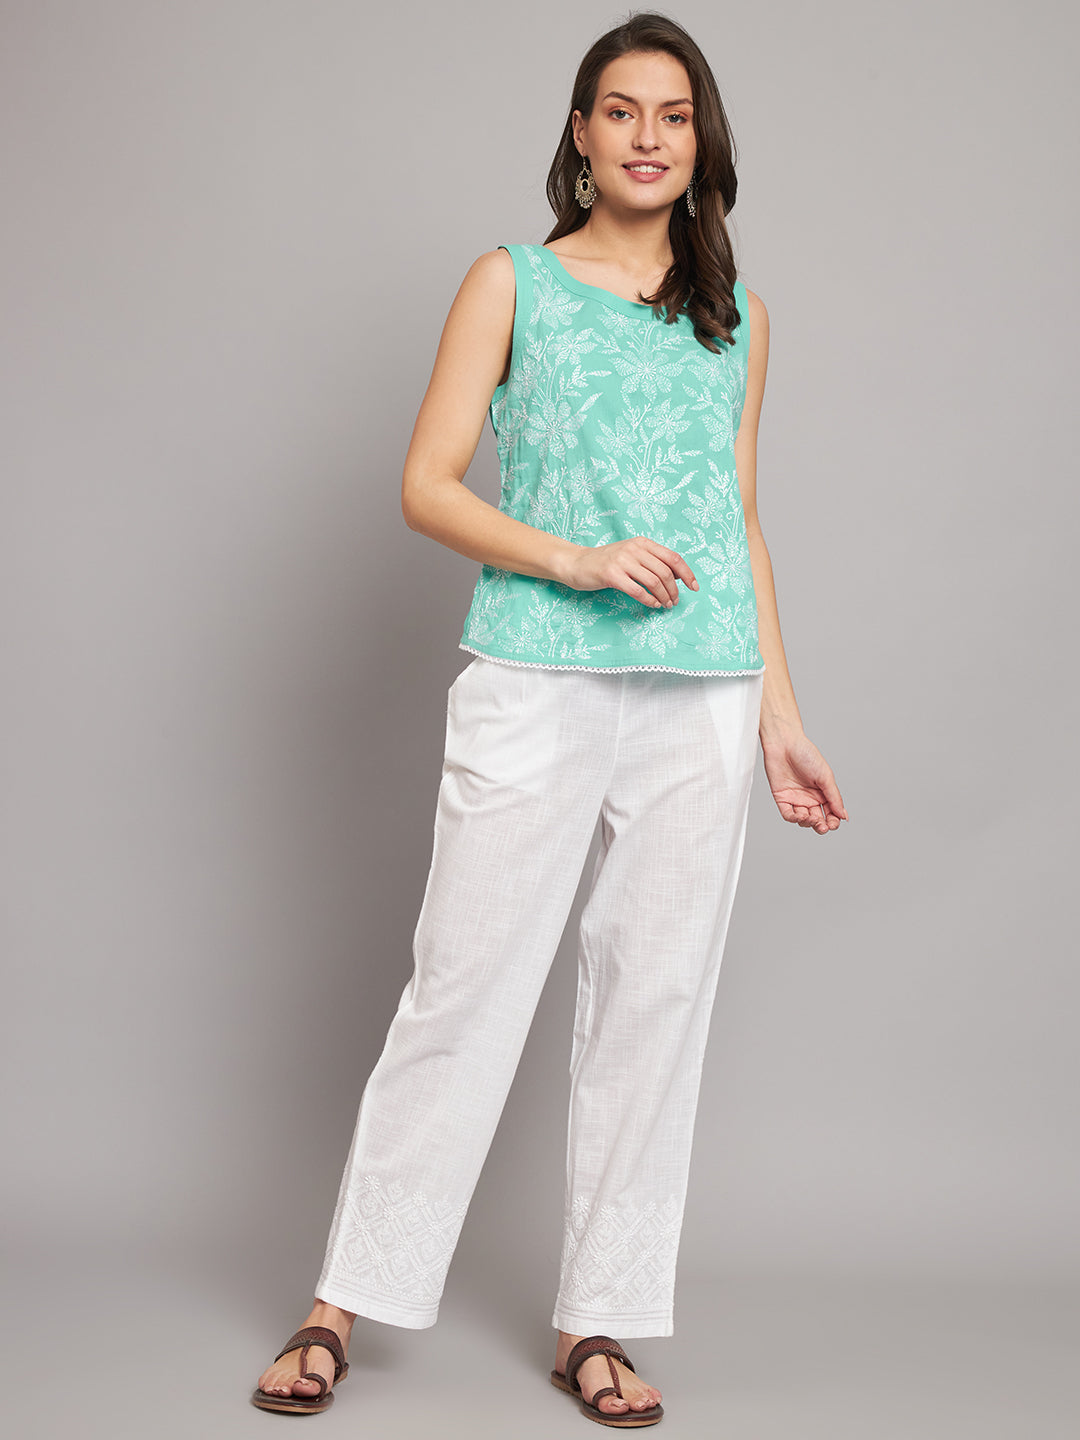 Blue Cotton Tepchi Embroidered Boat-Neck Top